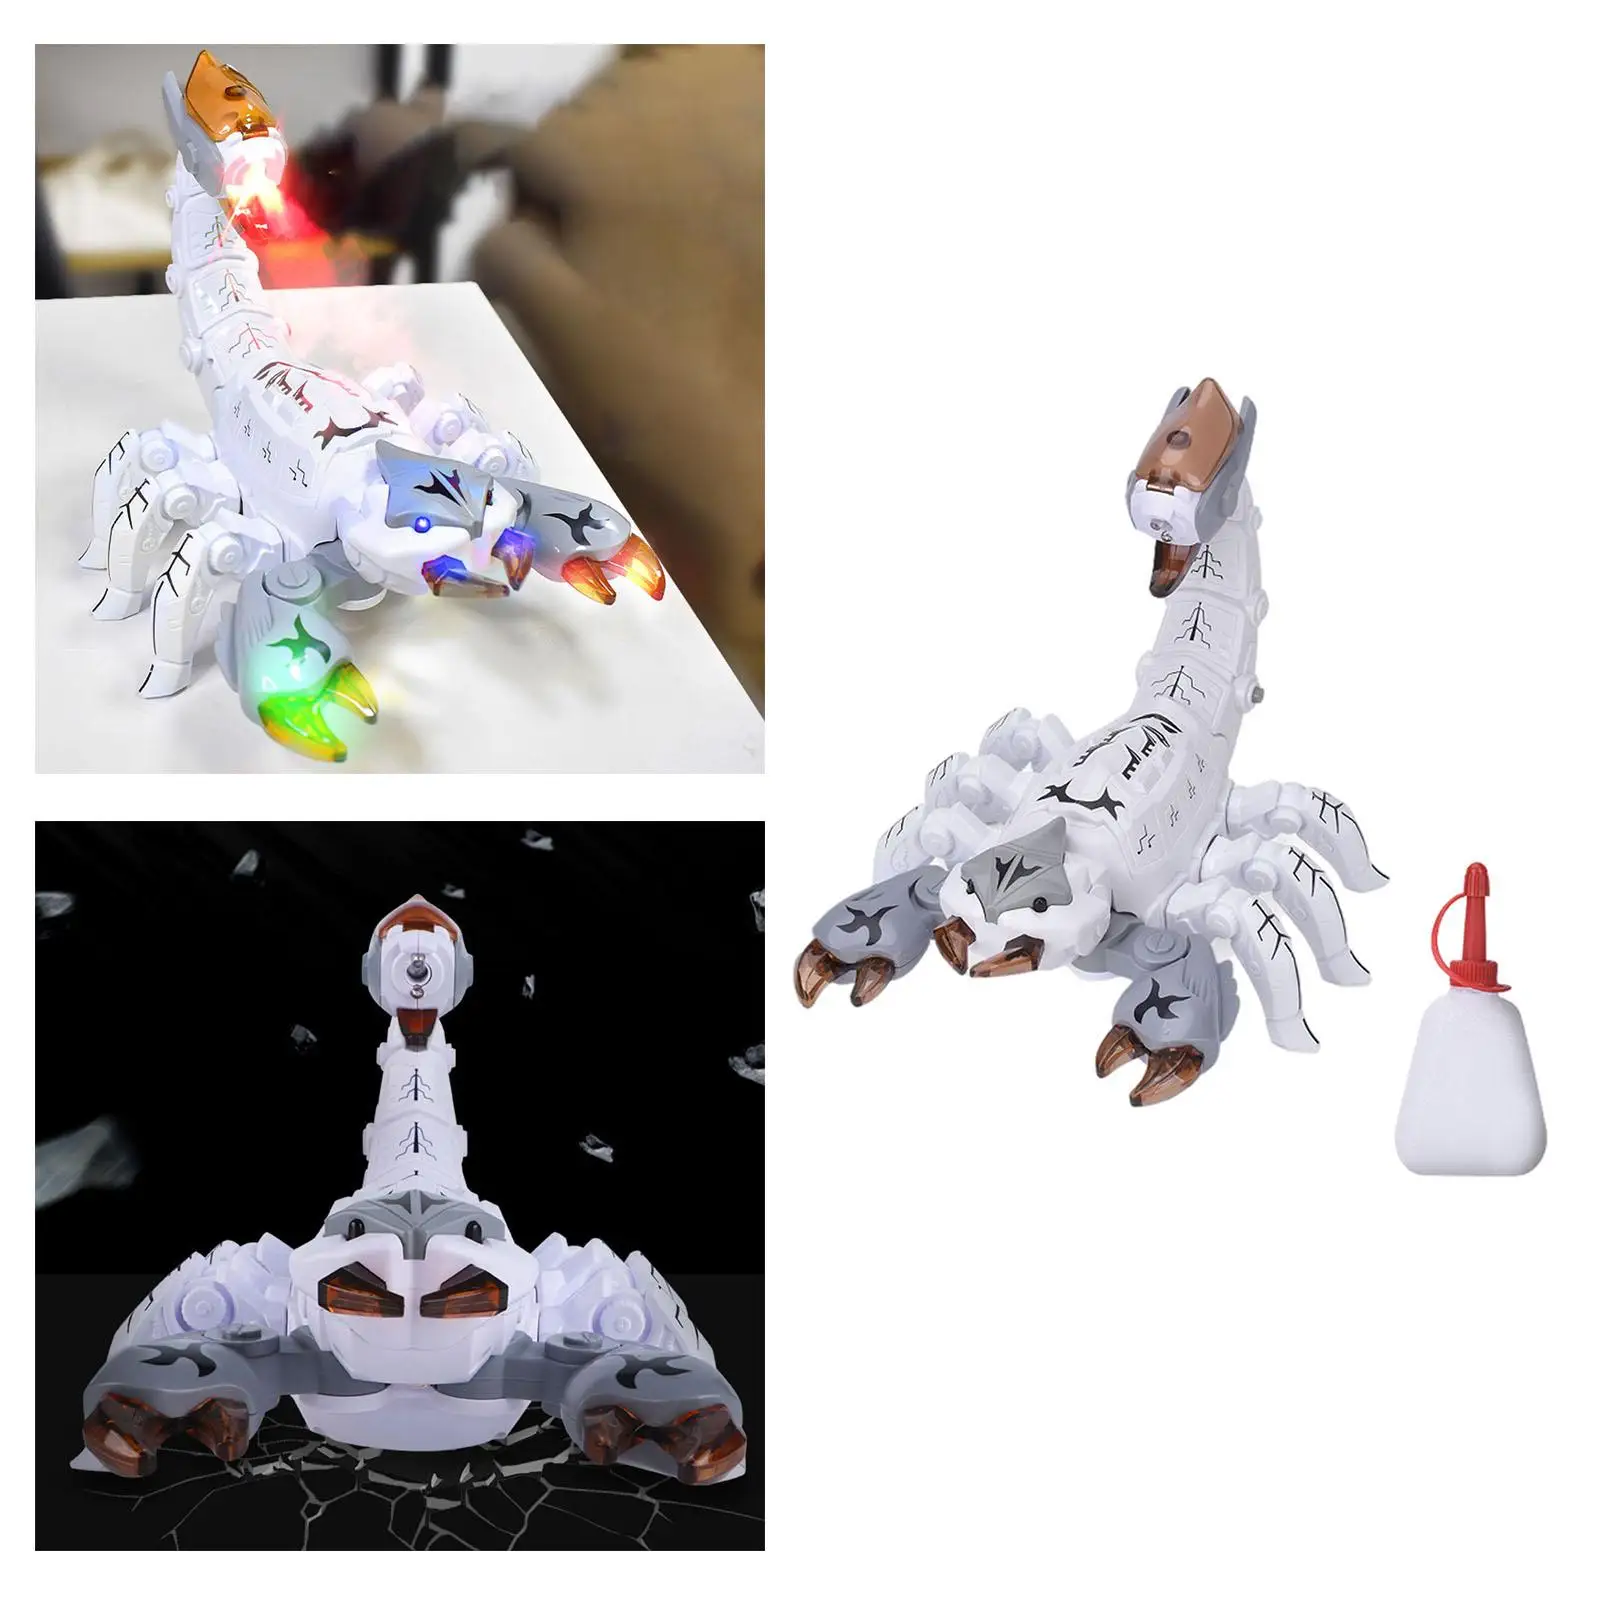 Realistic Scorpion Toy Spray Smoke with LED Light and Music Moving Joints for Boys Girls Simulation Animal Model Robot Toy